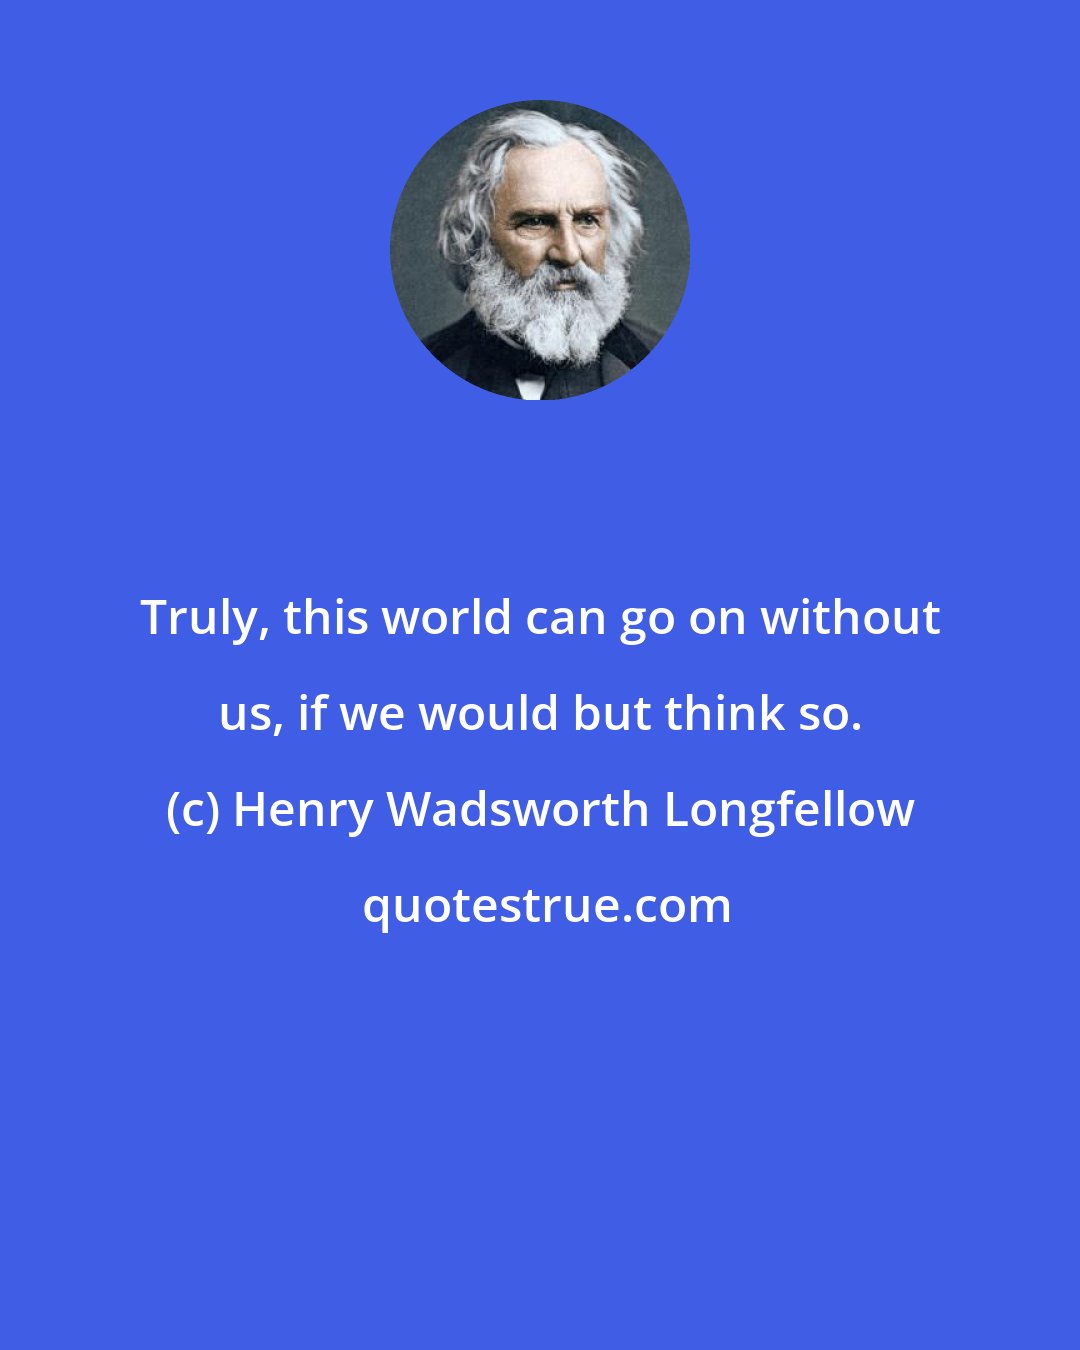 Henry Wadsworth Longfellow: Truly, this world can go on without us, if we would but think so.